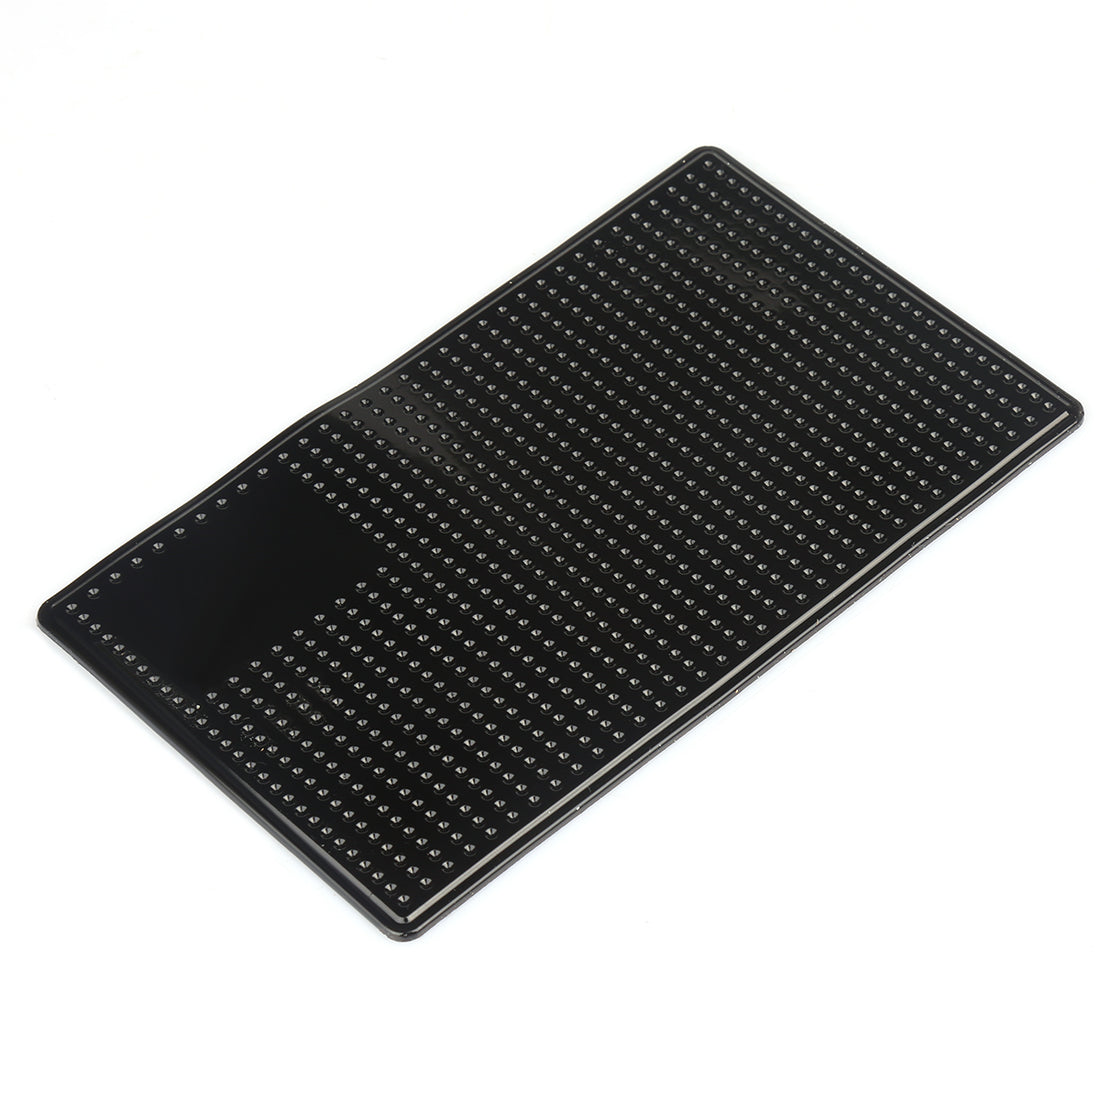 TAPIS VOITURE ANTIDERAPANT POUR TELEPHONE – Platyne